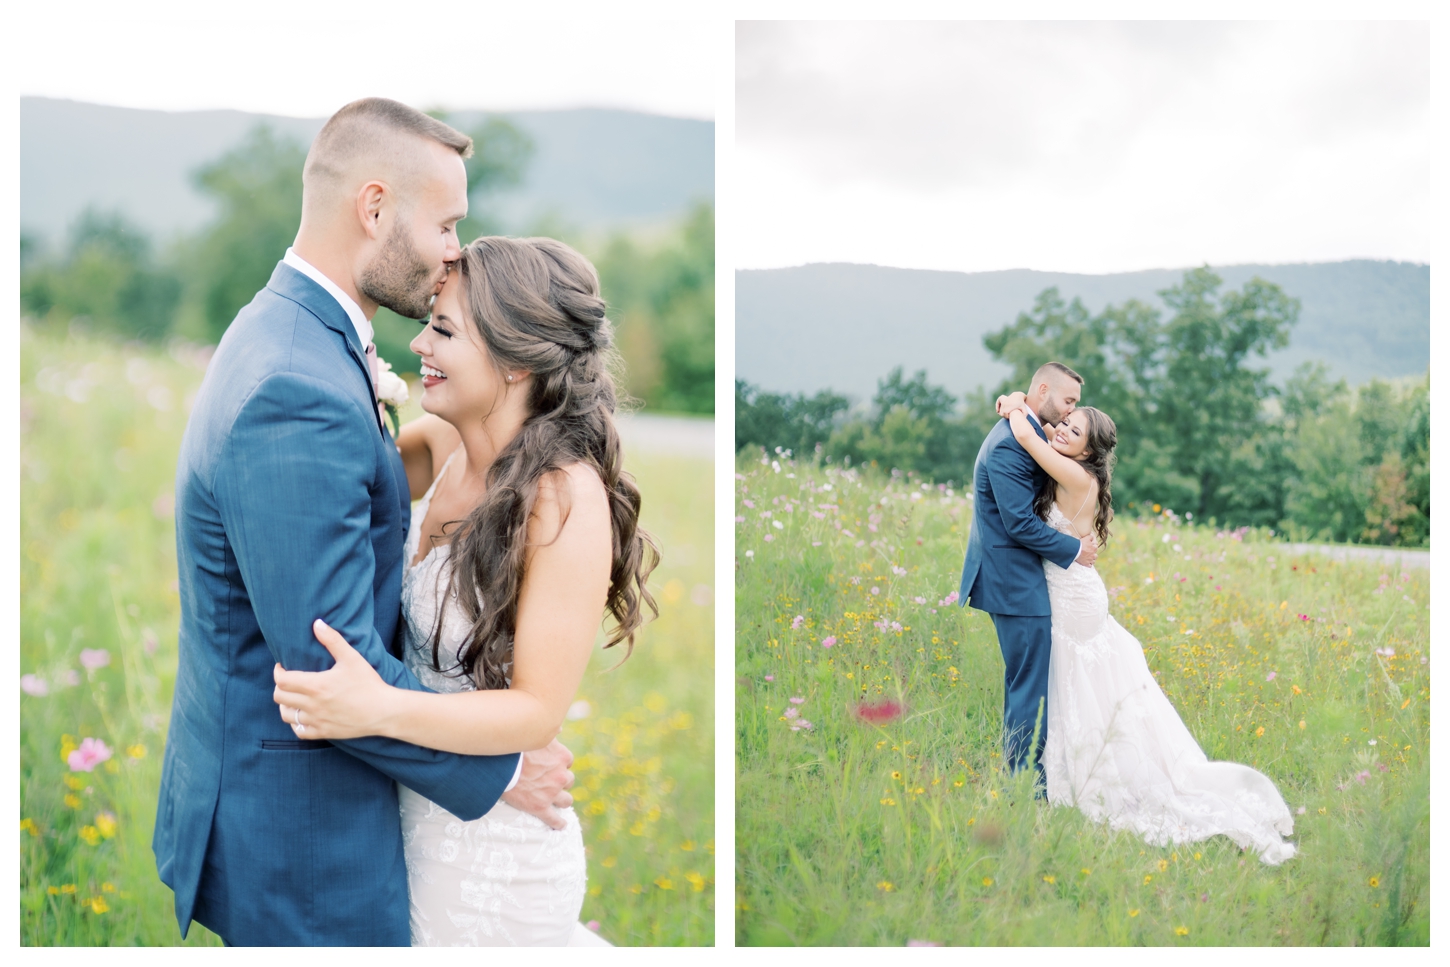 Flower Field in the Mountains Wedding